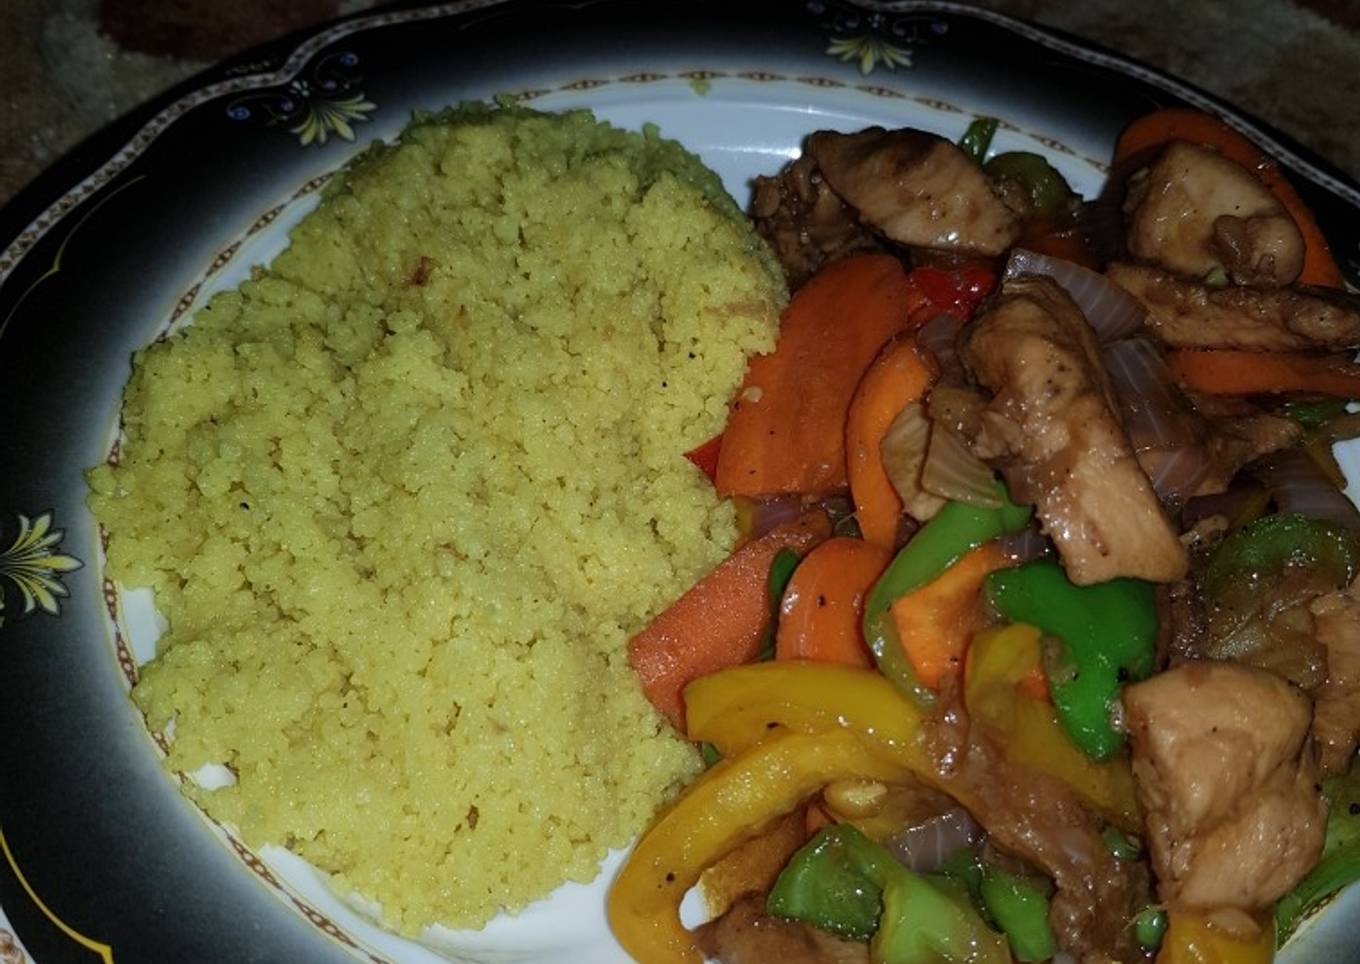 Cous cous with chicken and veggies